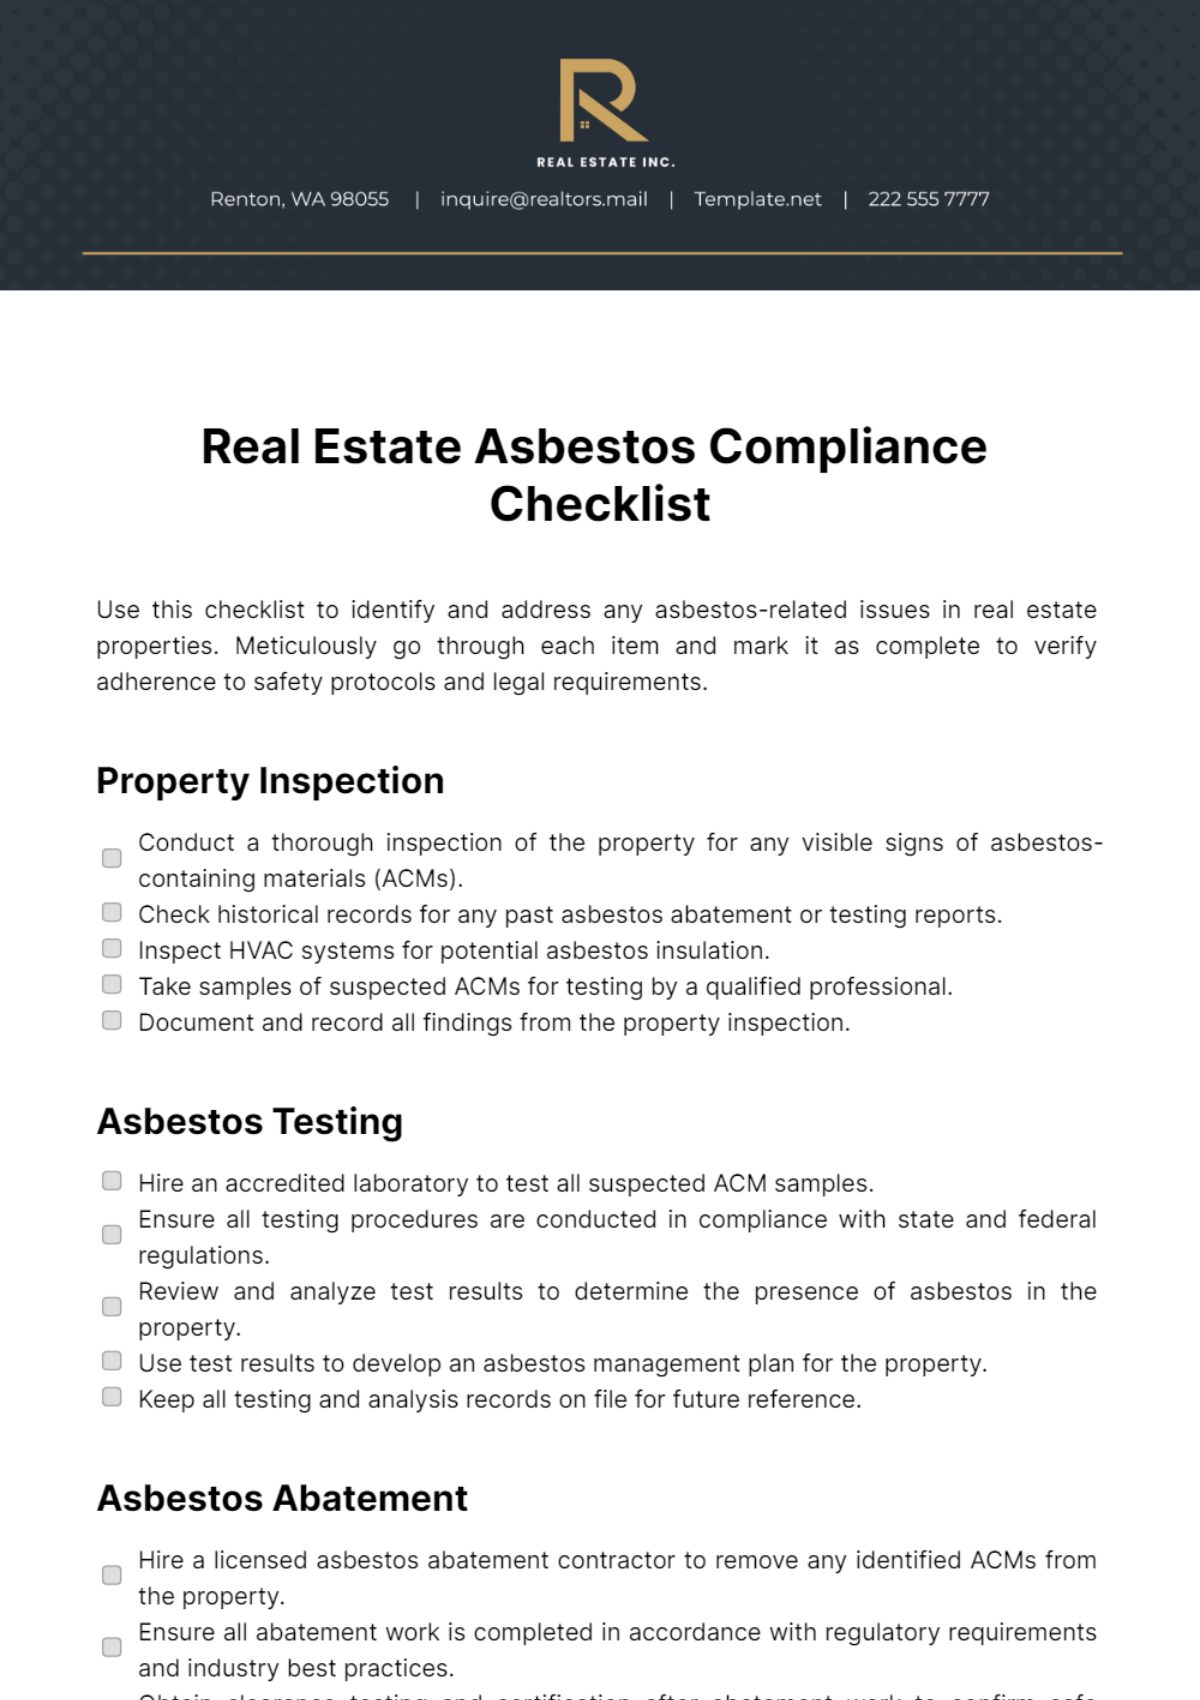 Free Real Estate Asbestos Compliance Checklist Template